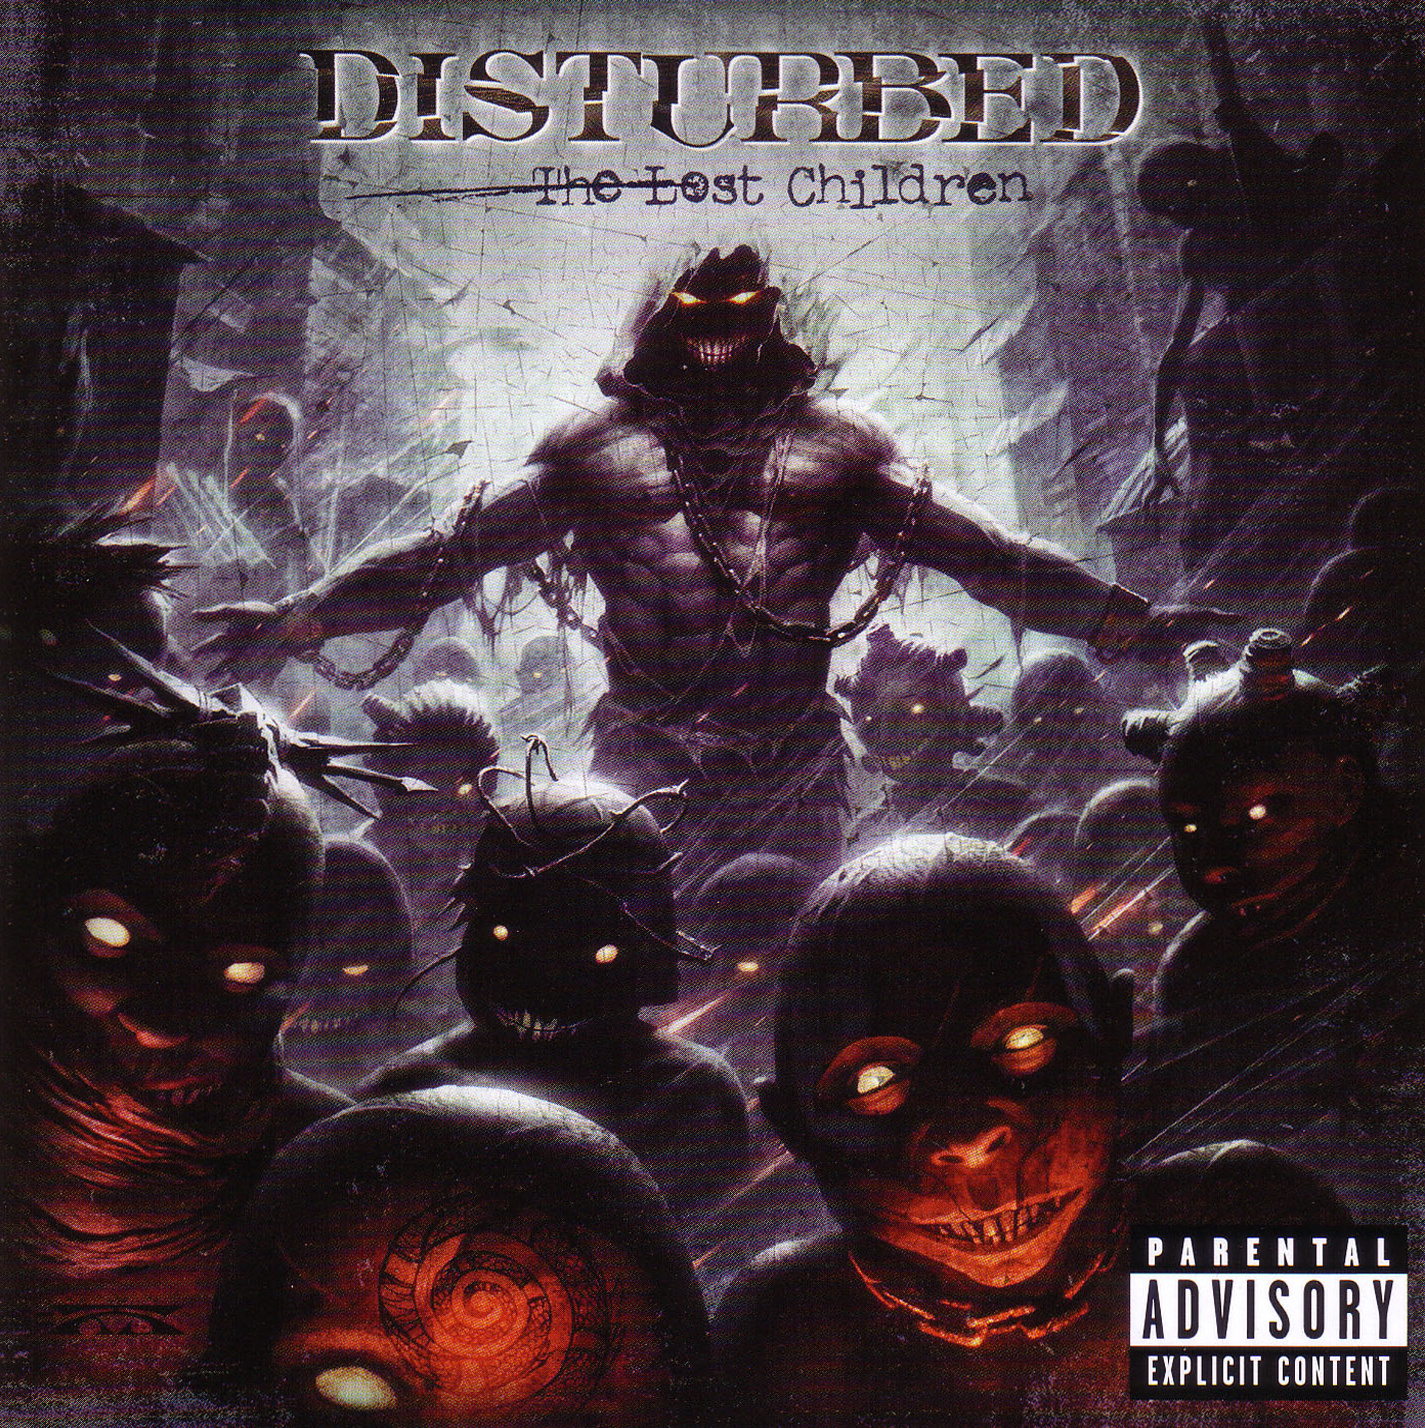 Covers - Disturbed - The Lost Children - Front1.jpg